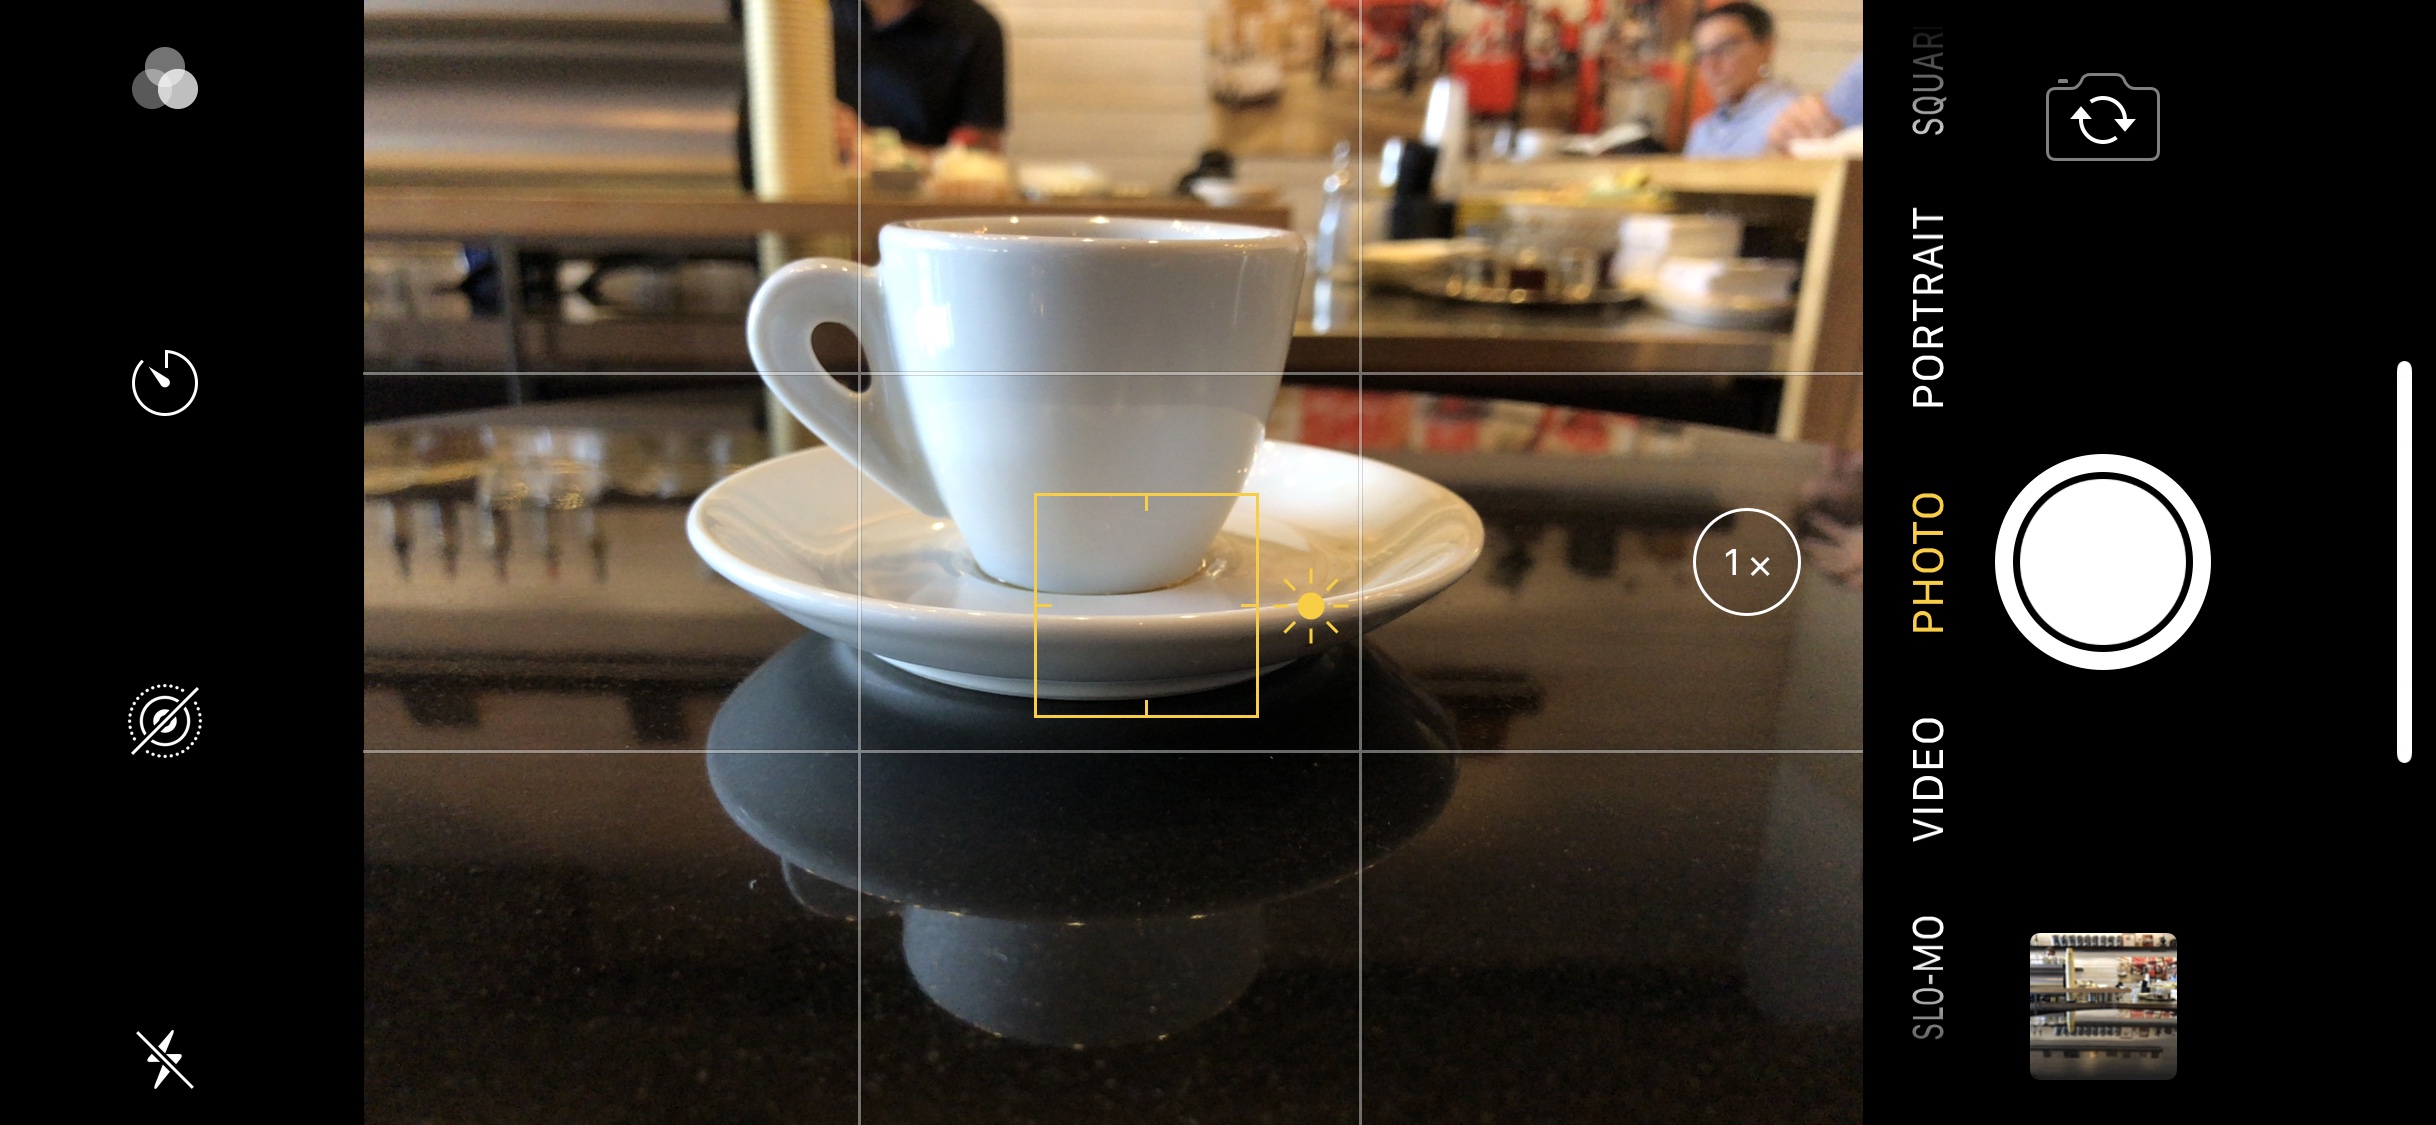  Tap to focus reveals an exposure compensation control at right. 